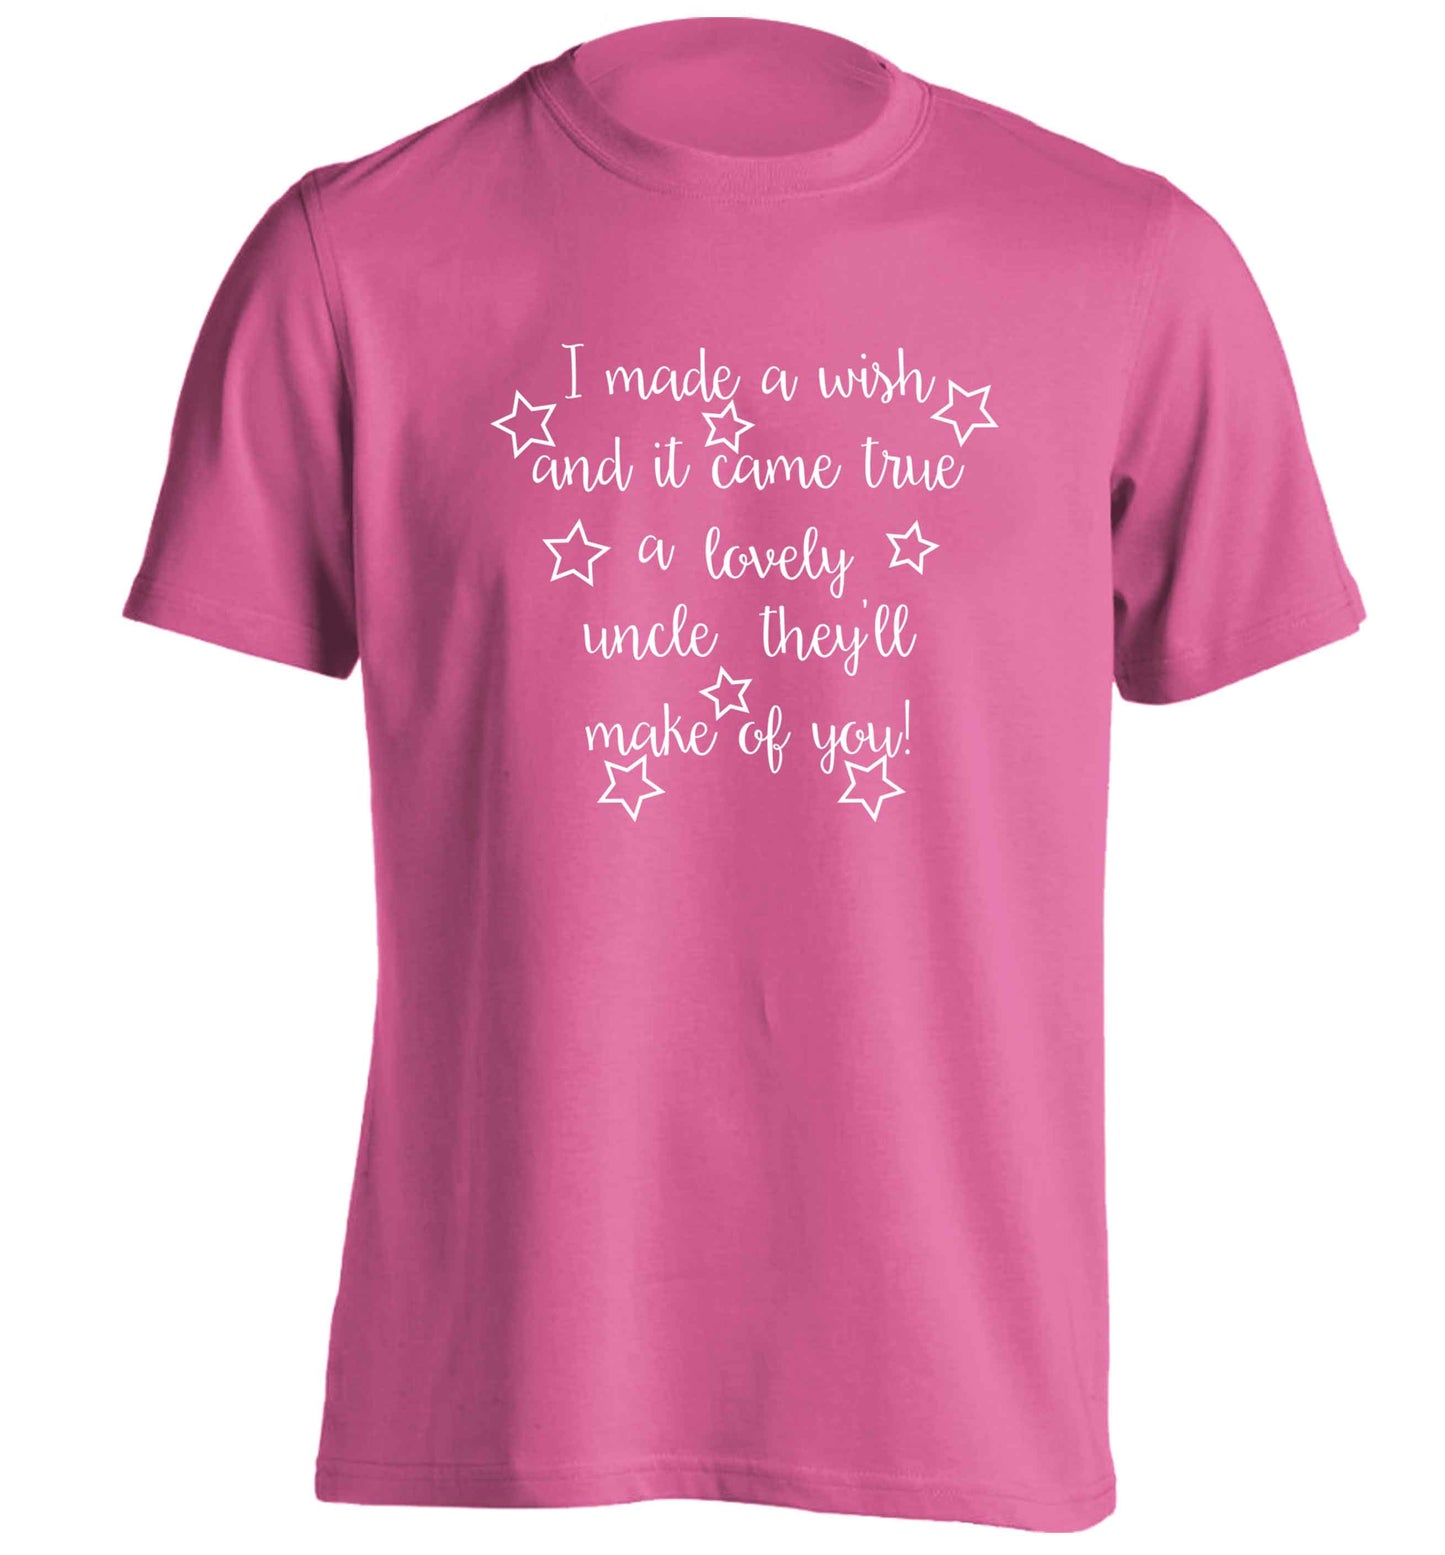 I made a wish and it came true a lovely uncle they'll make of you! adults unisex pink Tshirt 2XL